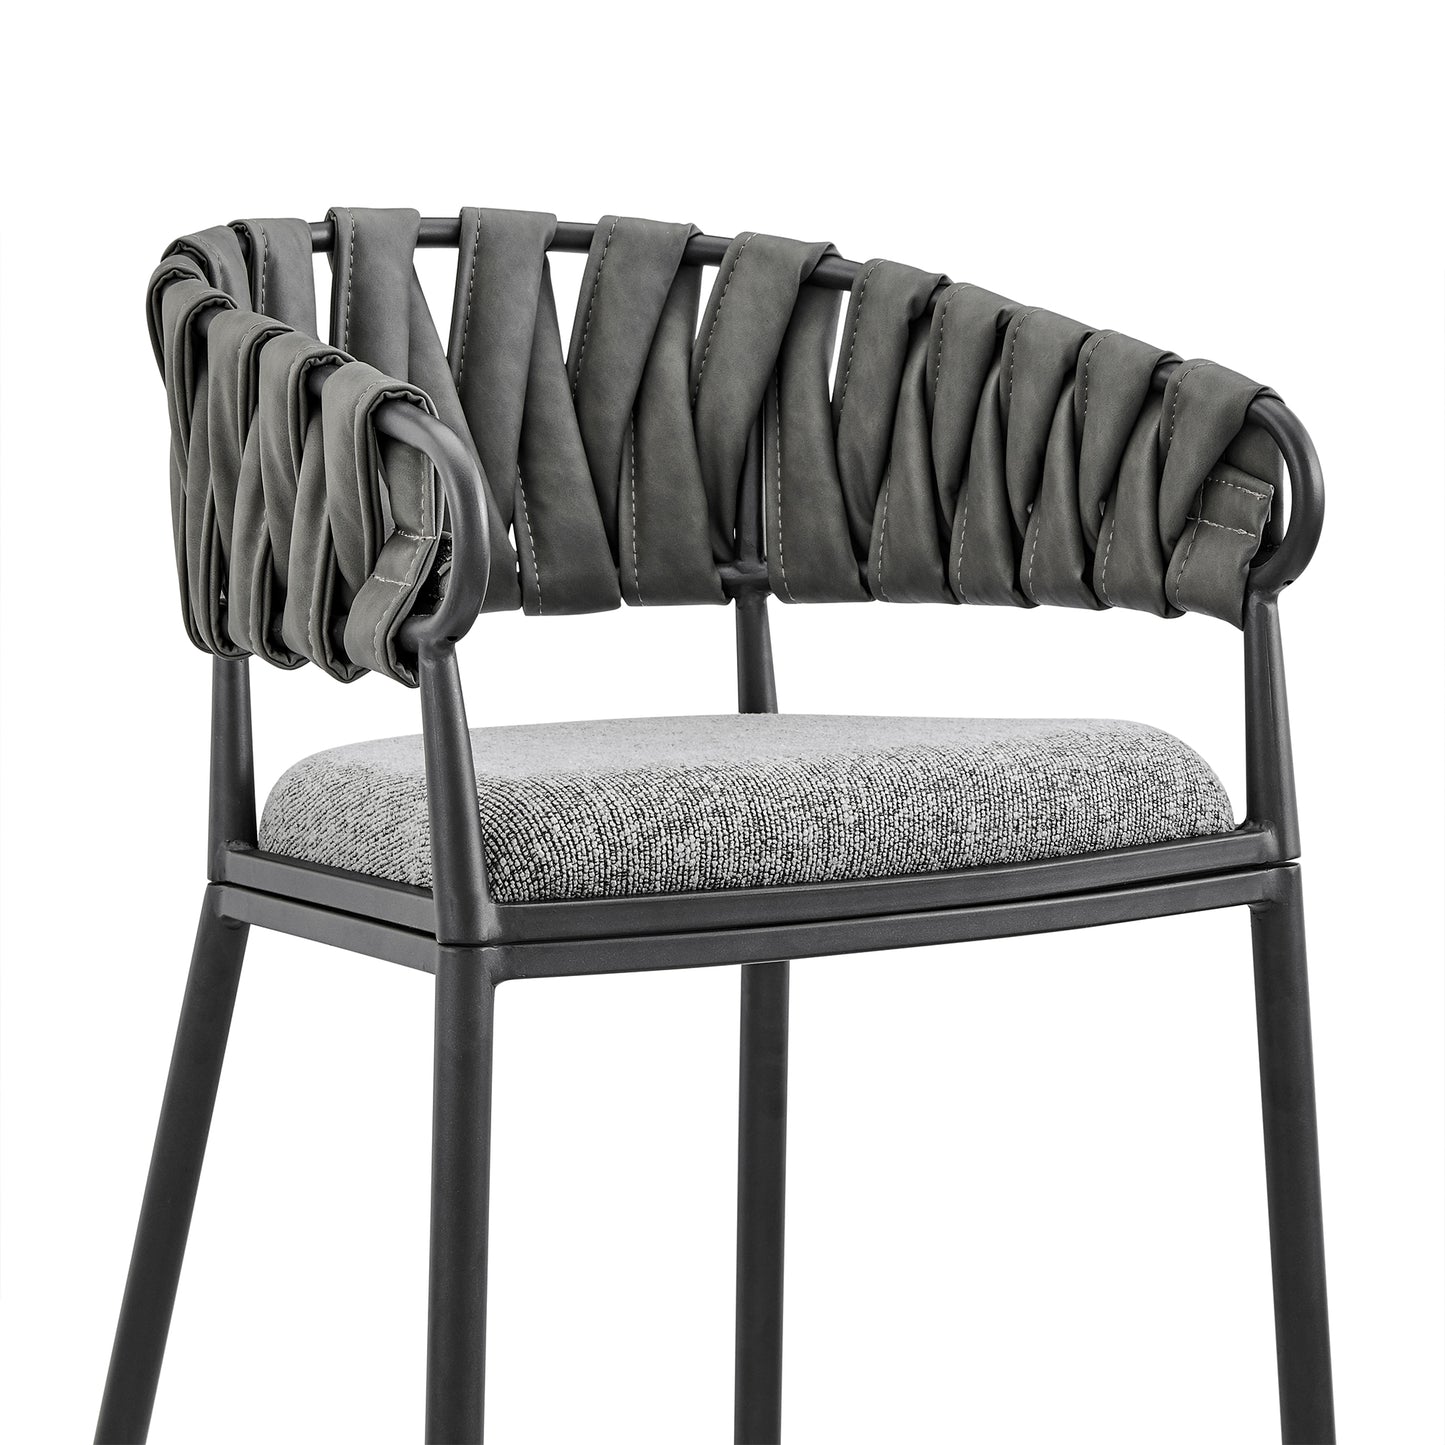 Giovanni 30" Bar Stool in Black Metal with Gray Fabric and Faux Leather